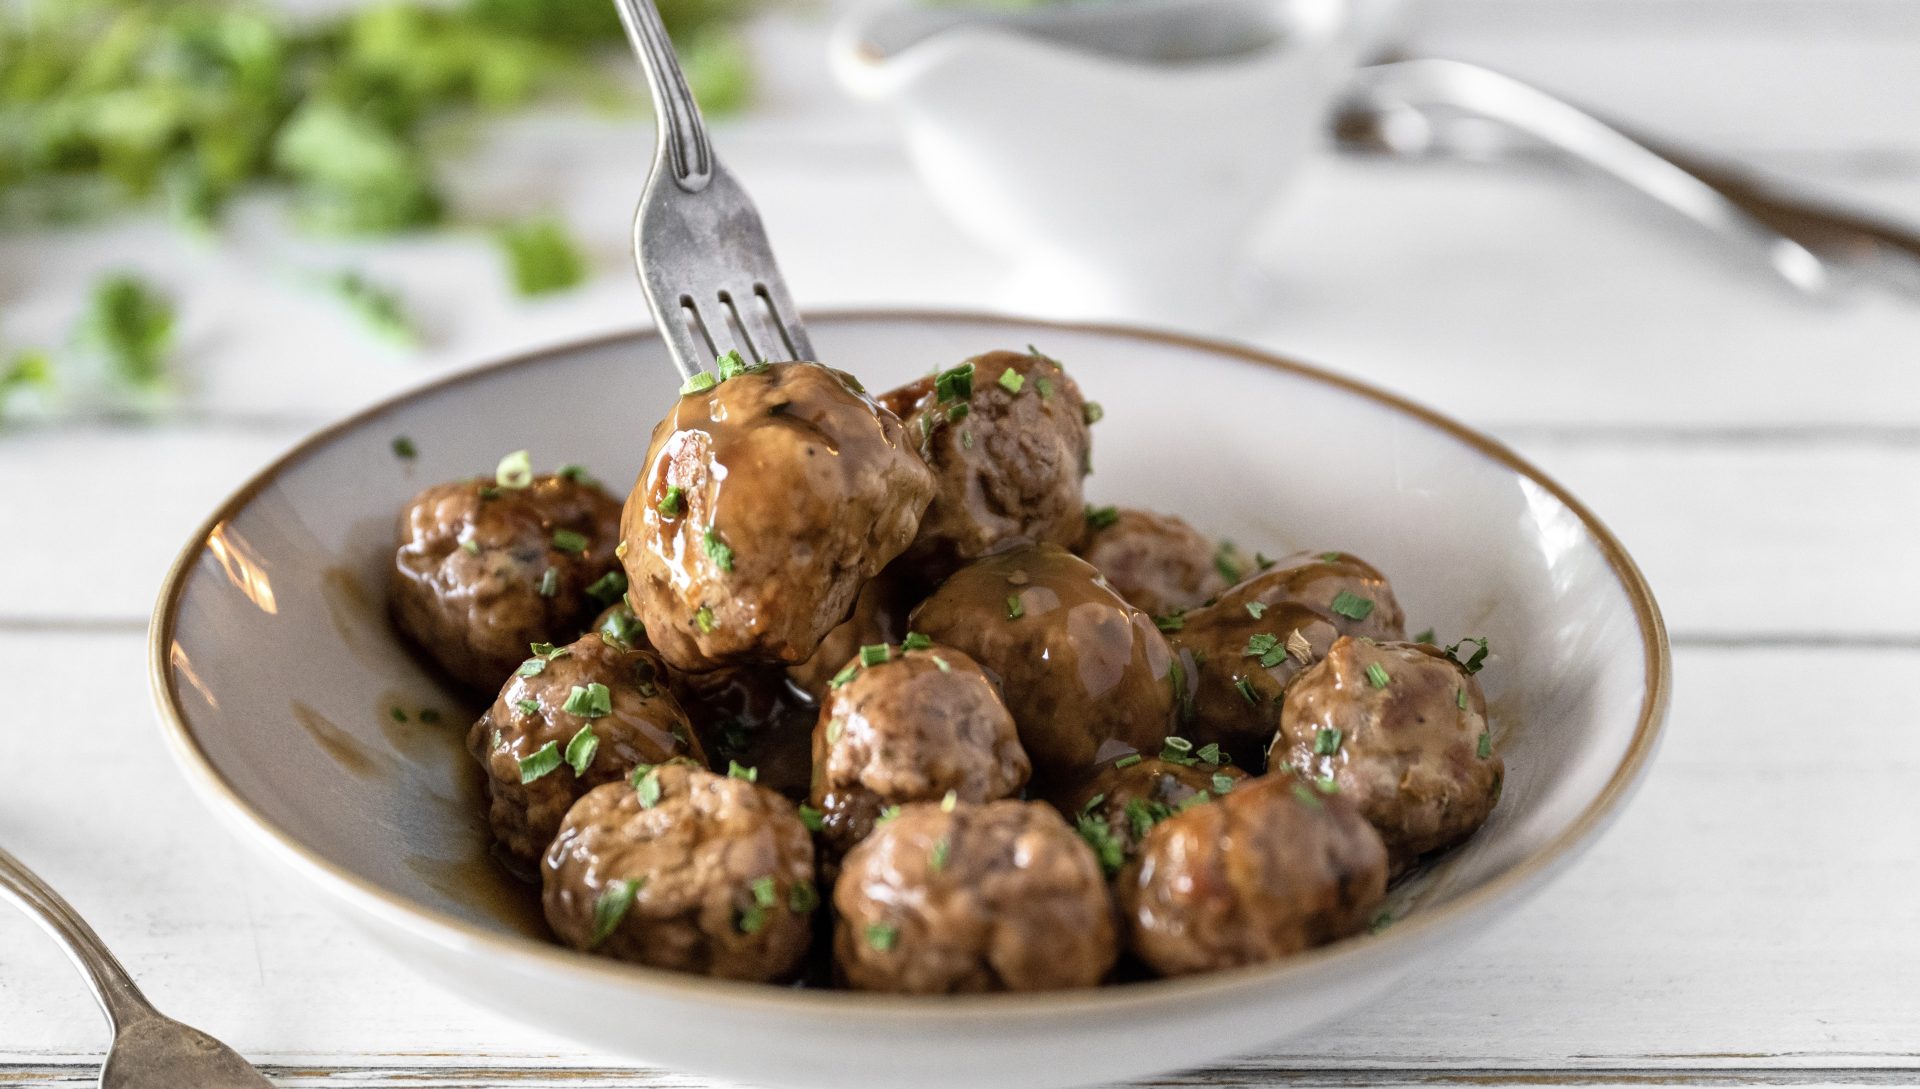 Yum…? Food Company Creates Meatball From Woolly Mammoth Cells